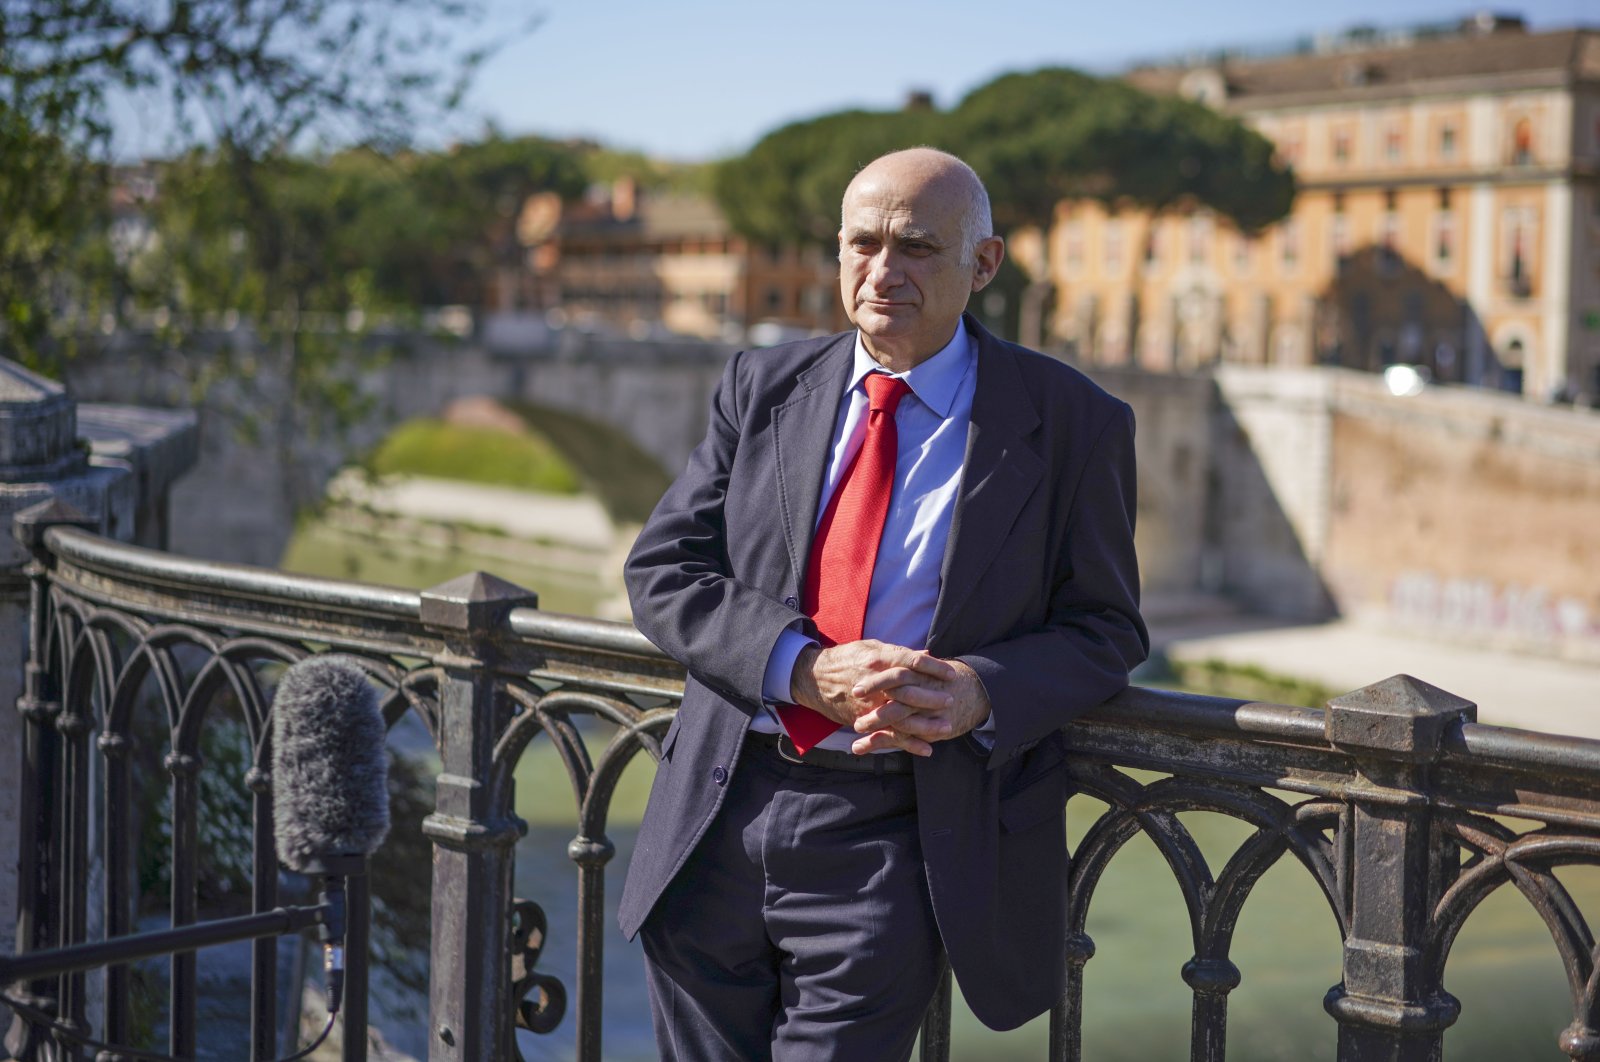 Spallanzani Hospital's scientific director, Giuseppe Ippolito, talks during an interview with The Associated Press, Rome, April 15, 2020. (AP Photo)